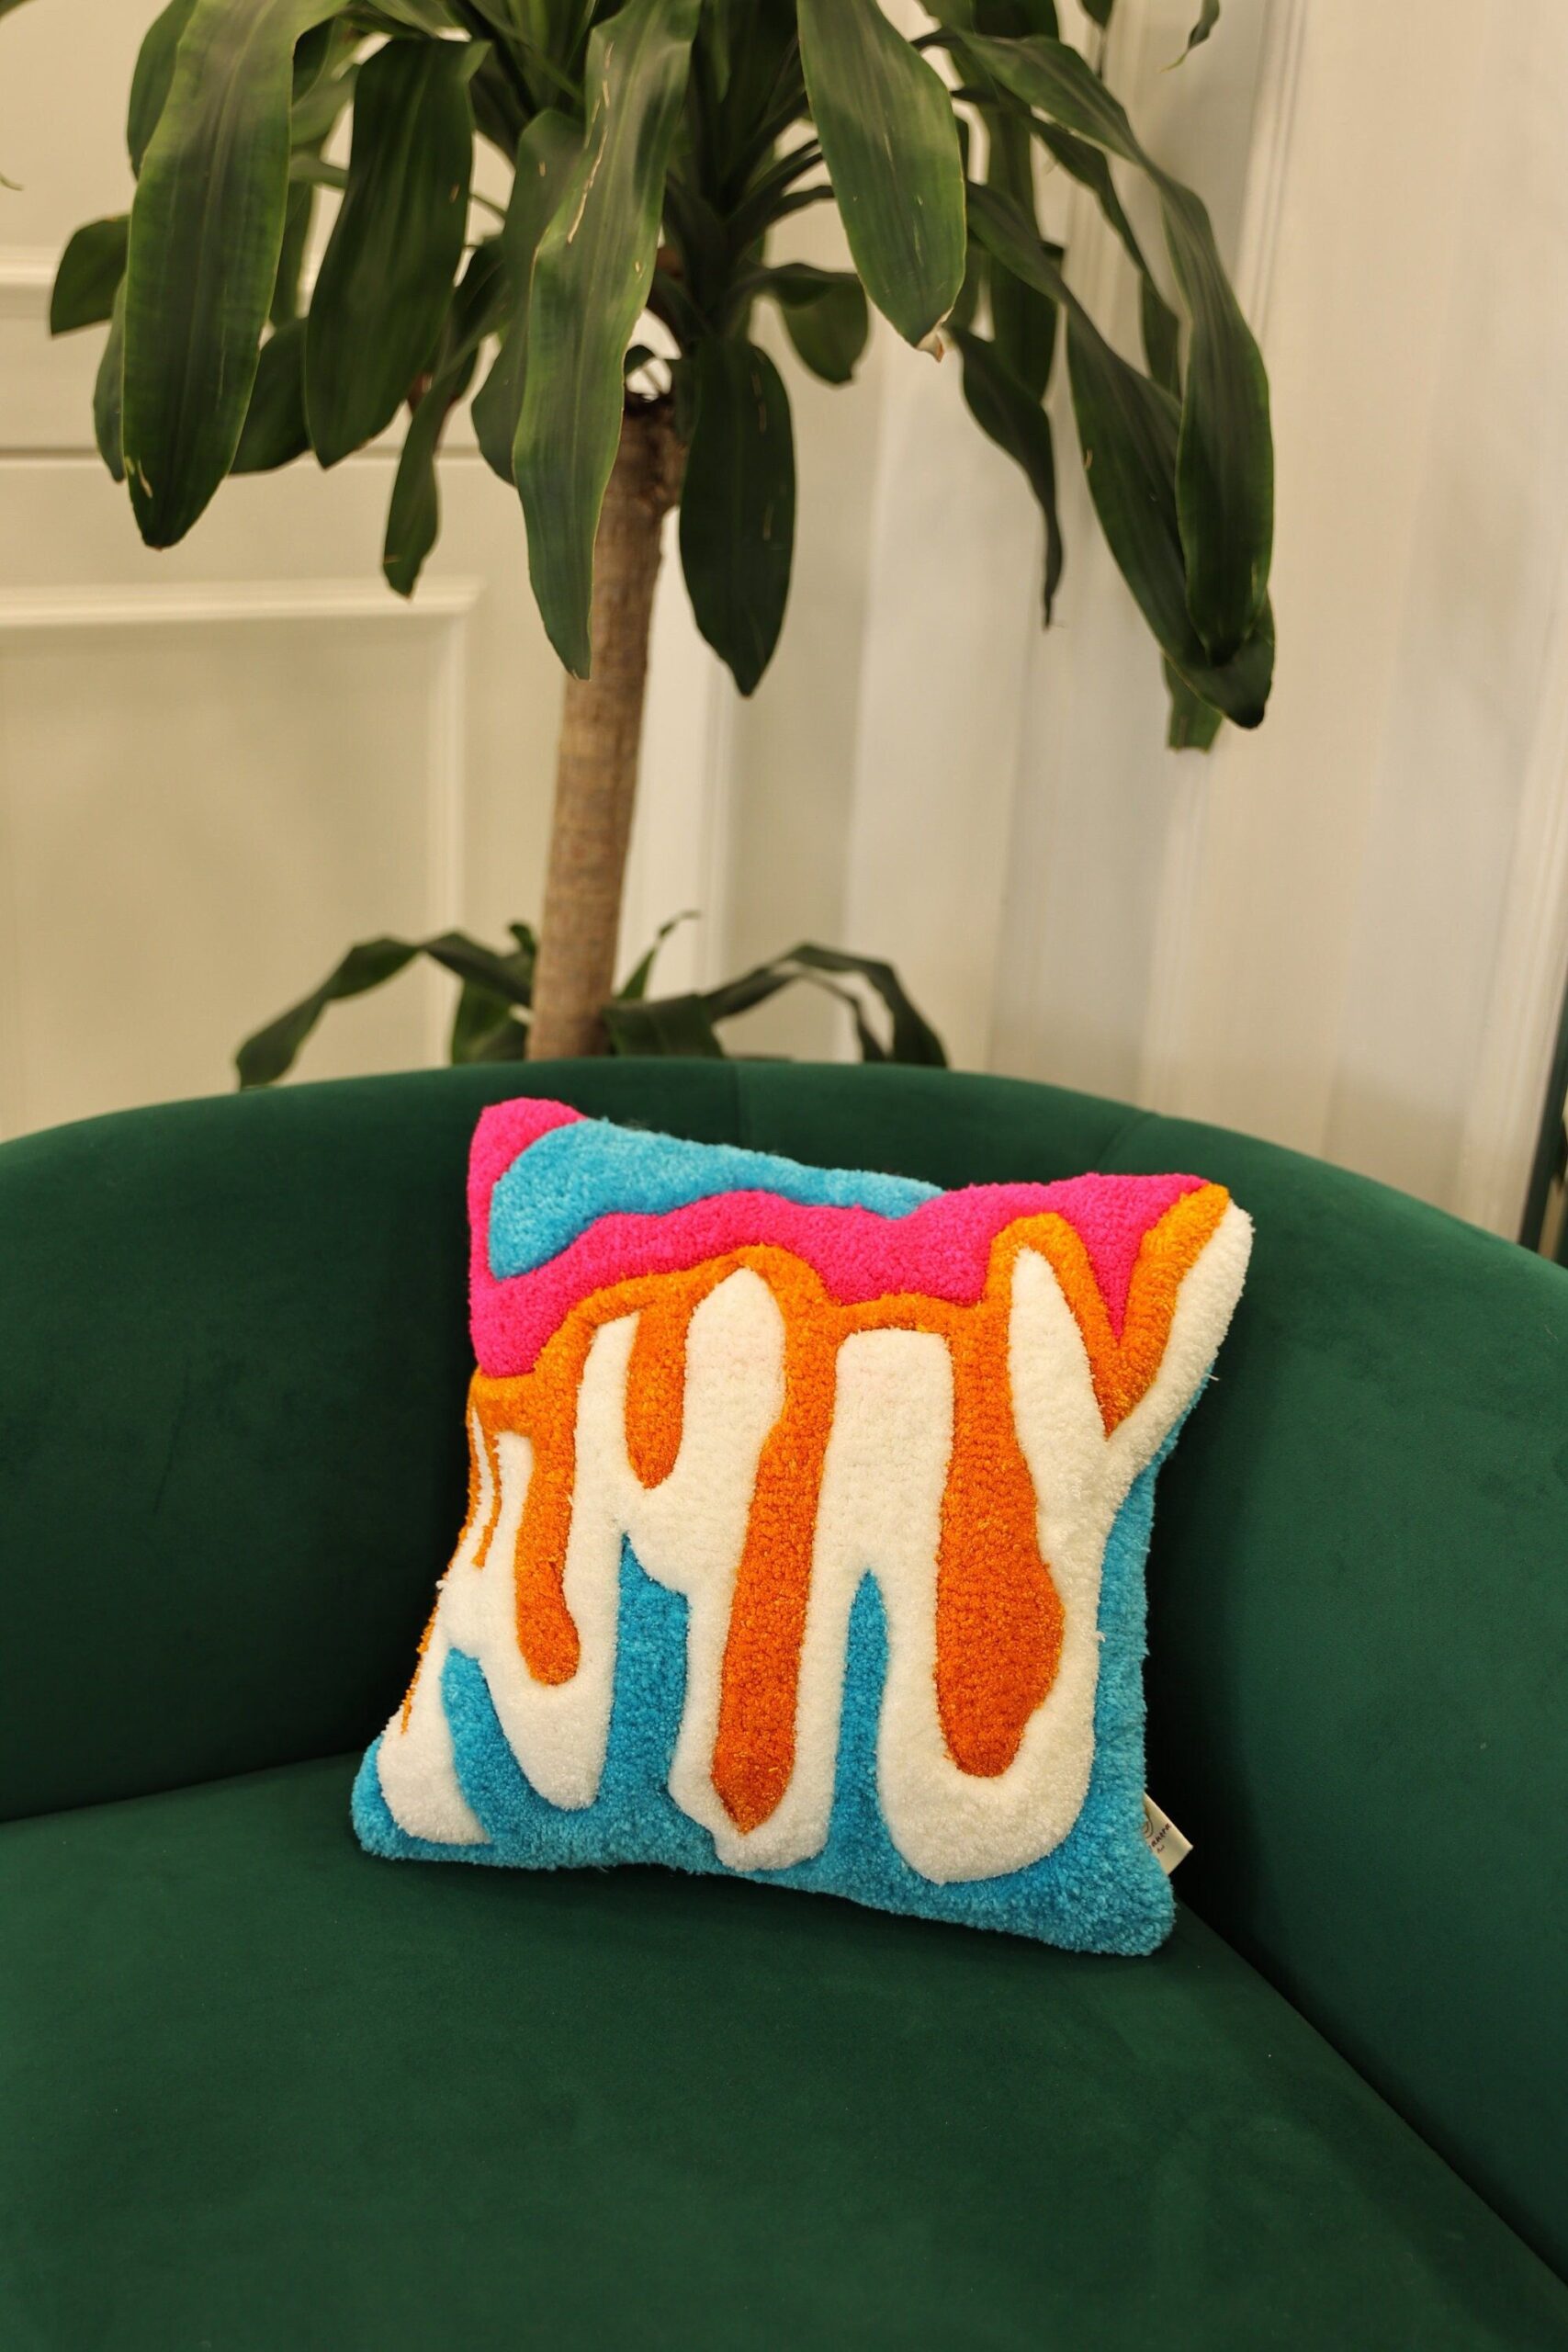 Adding a Pop of Color to Your Space: Stylish and Colorful Decorative Sofa Pillows